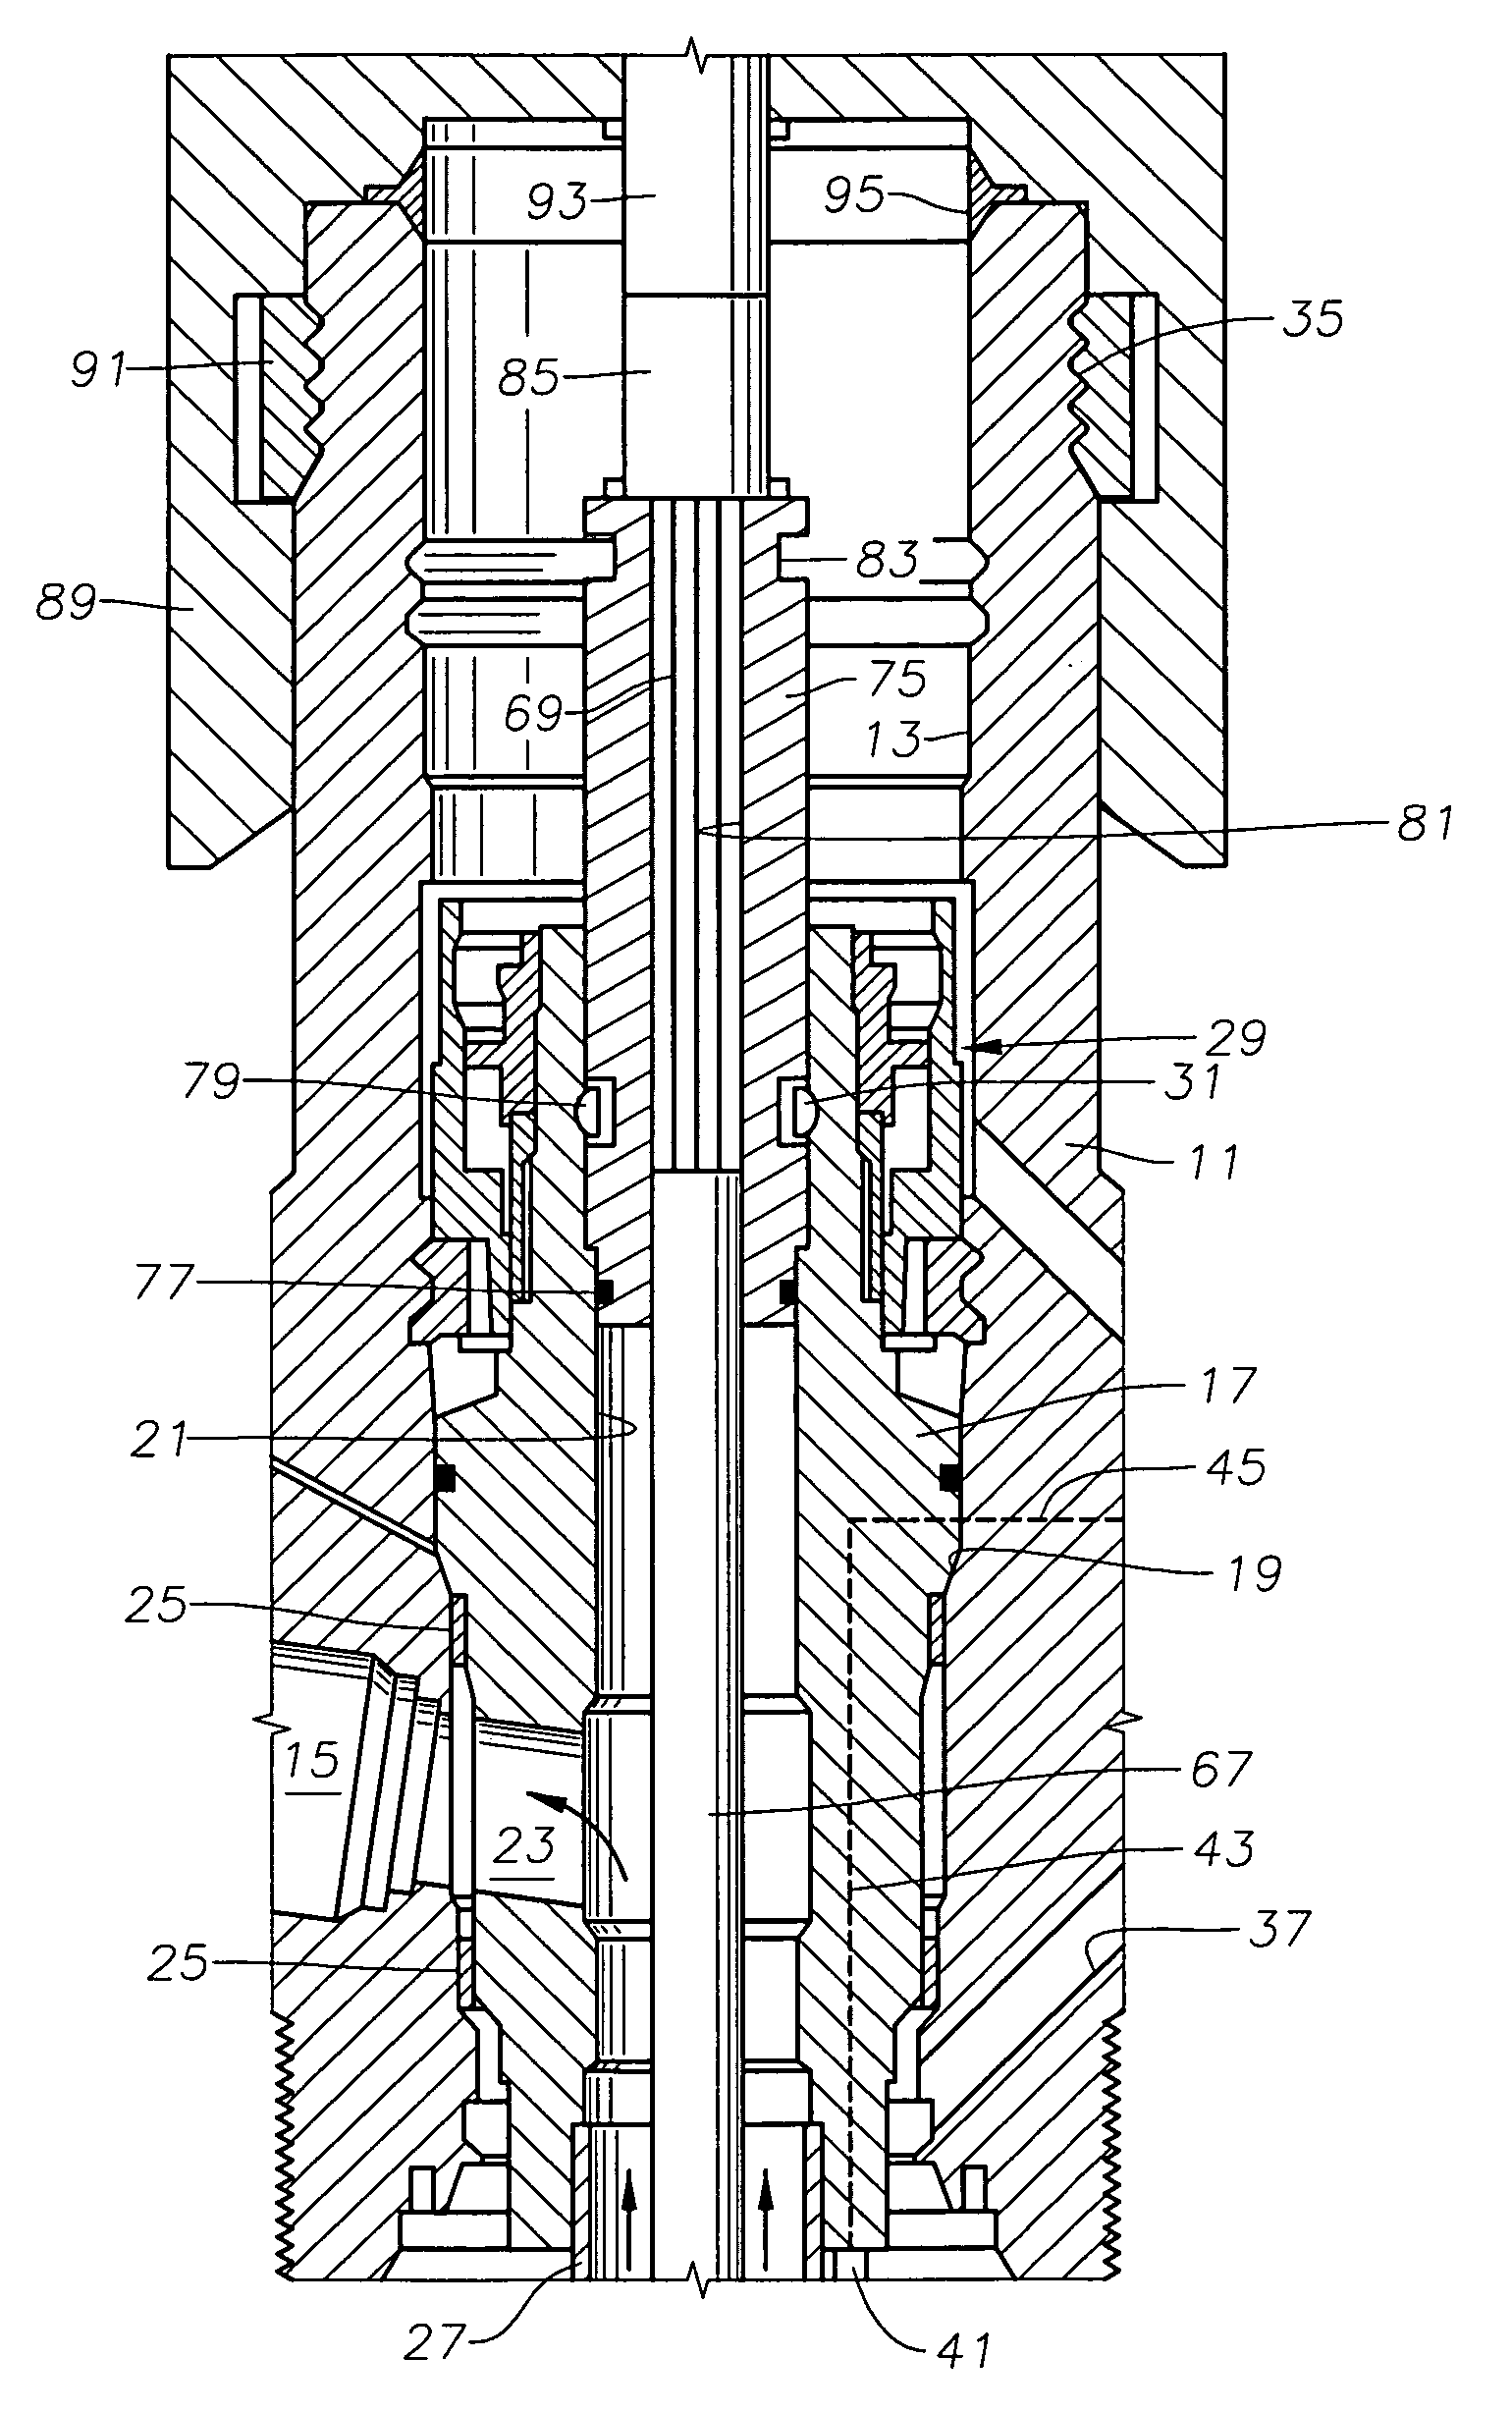 Subsea well with electrical submersible pump above downhole safety valve